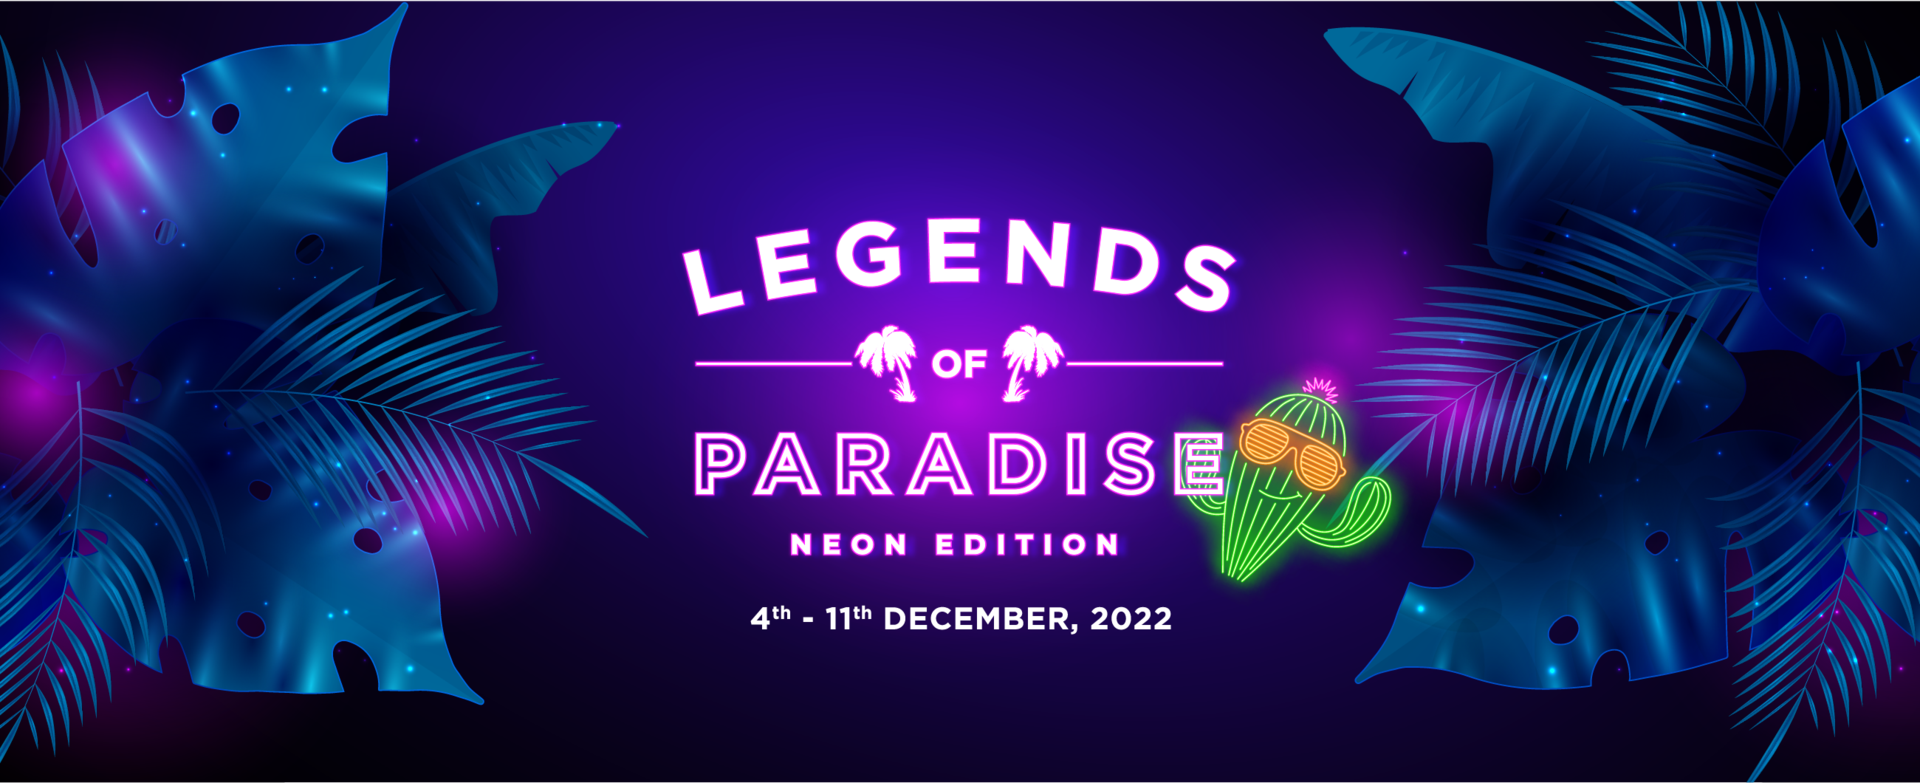 dark purple background with tropical leaves text legends of paradise neon edition 4th through 11th december 2022